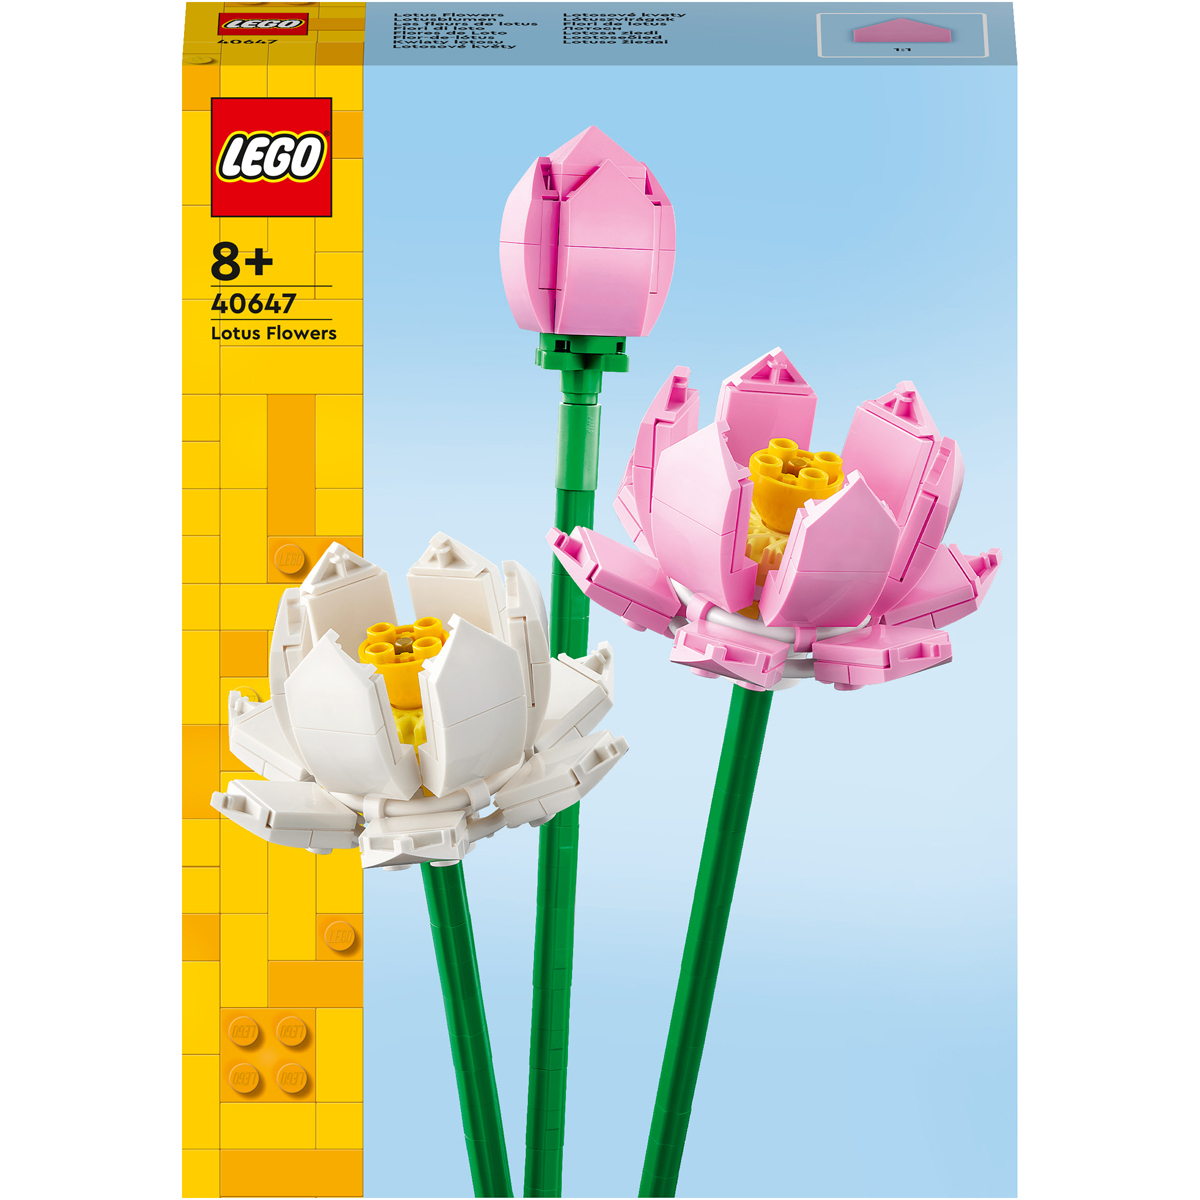 LEGO's New Botanical Collection Lends A Touch Of Nature Into